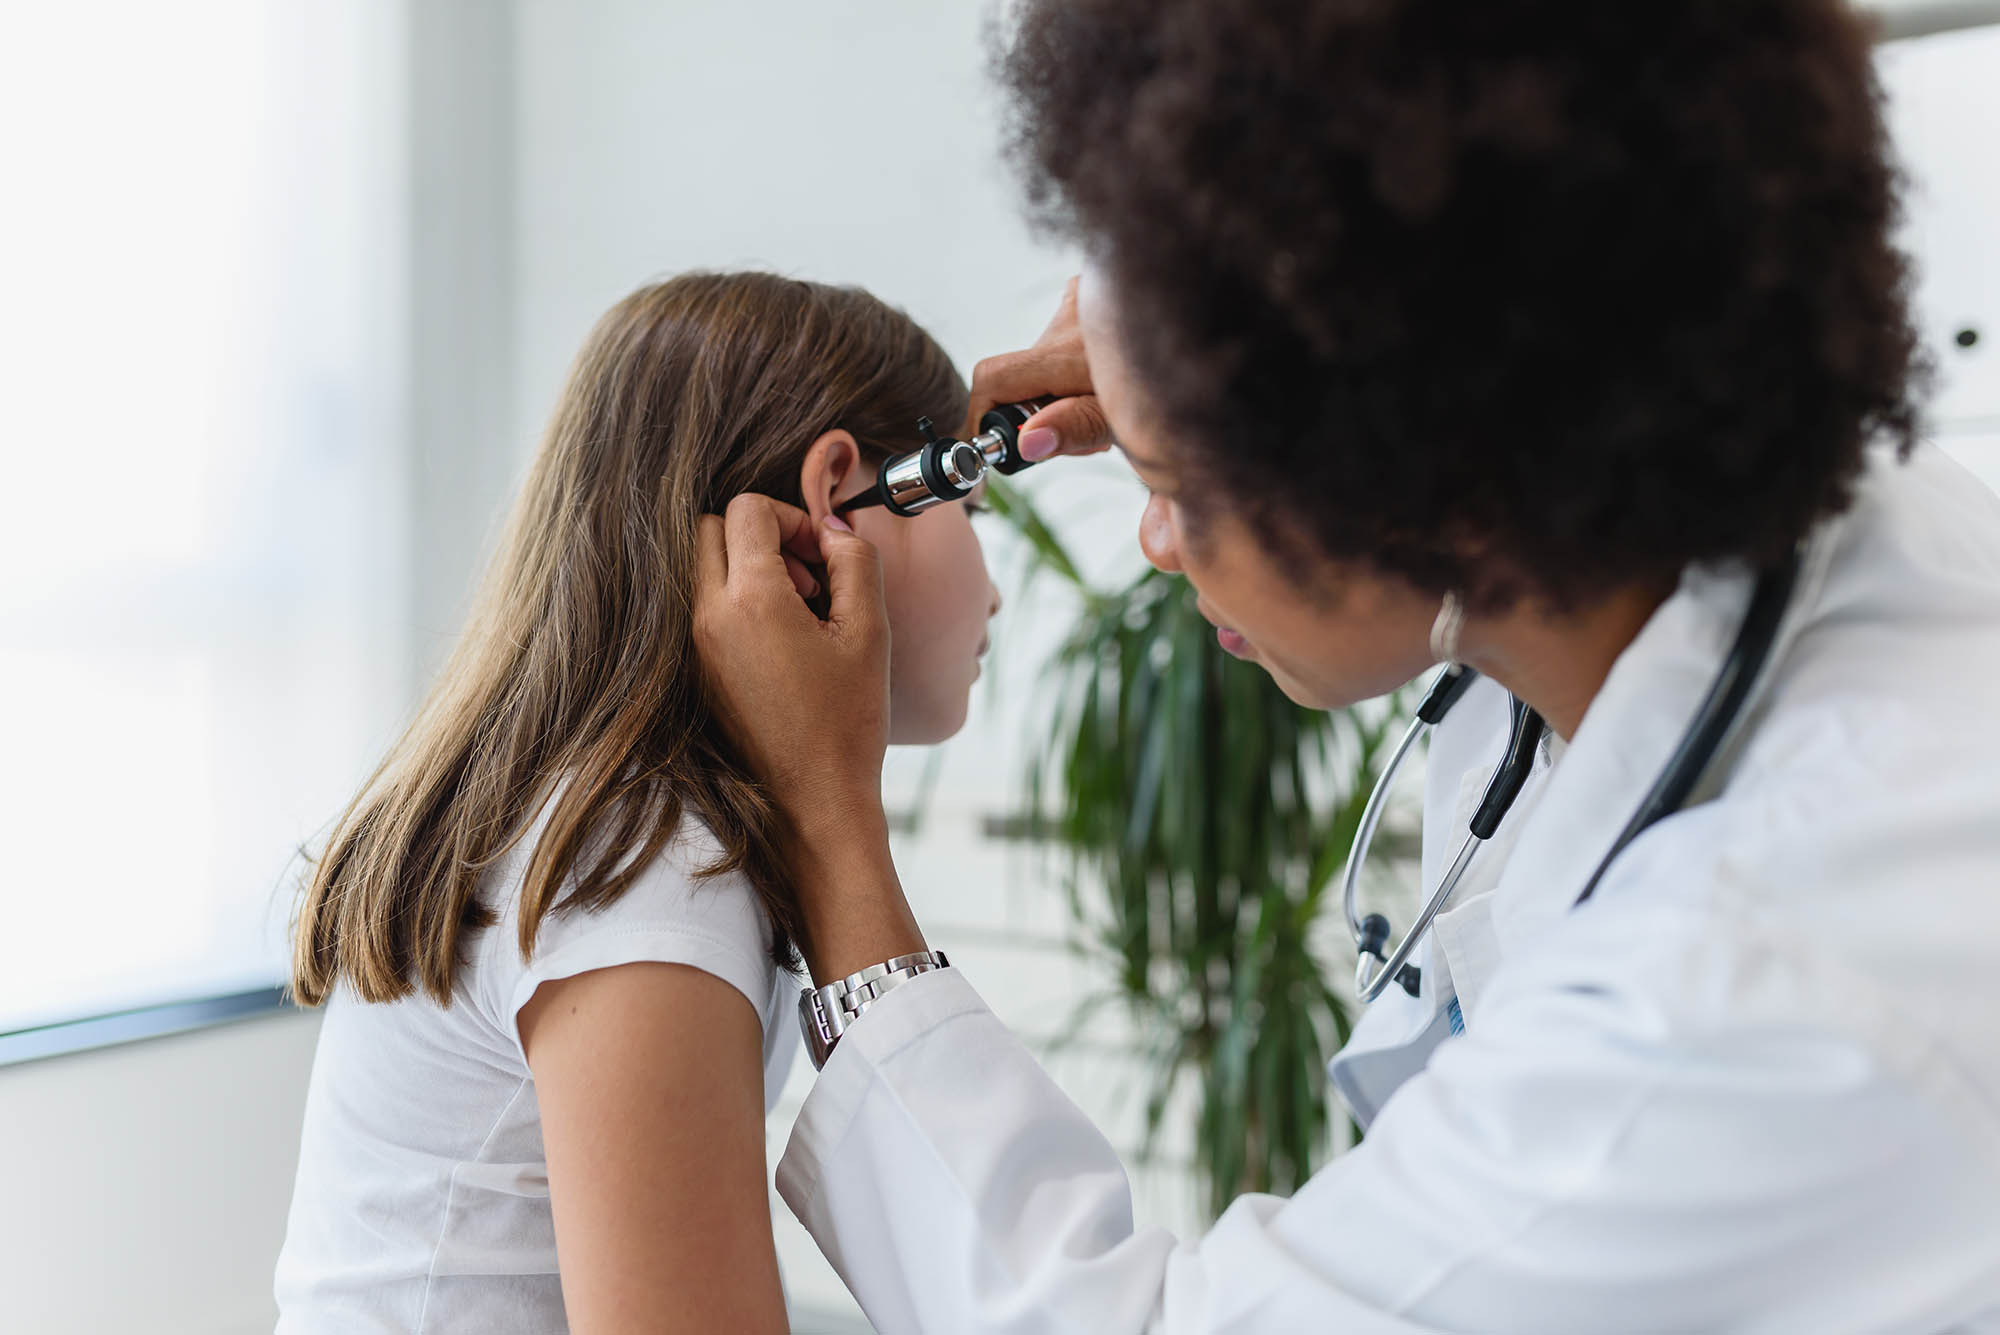 Listen Up: Preventing Common Ear Infections in Children and Adults